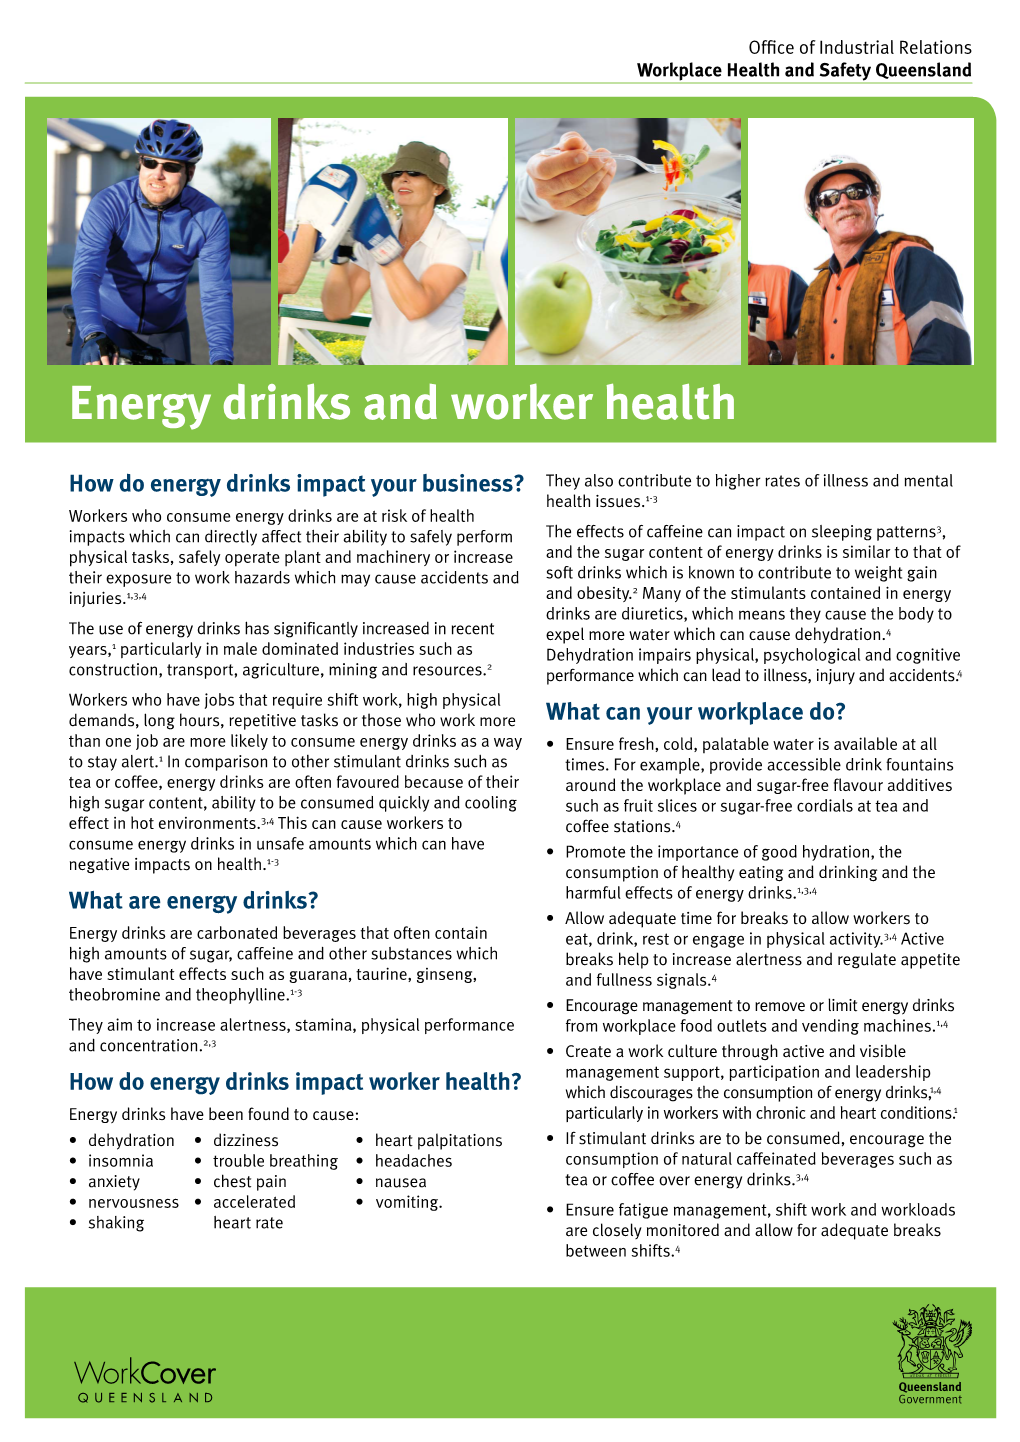 Energy Drinks and Worker Health